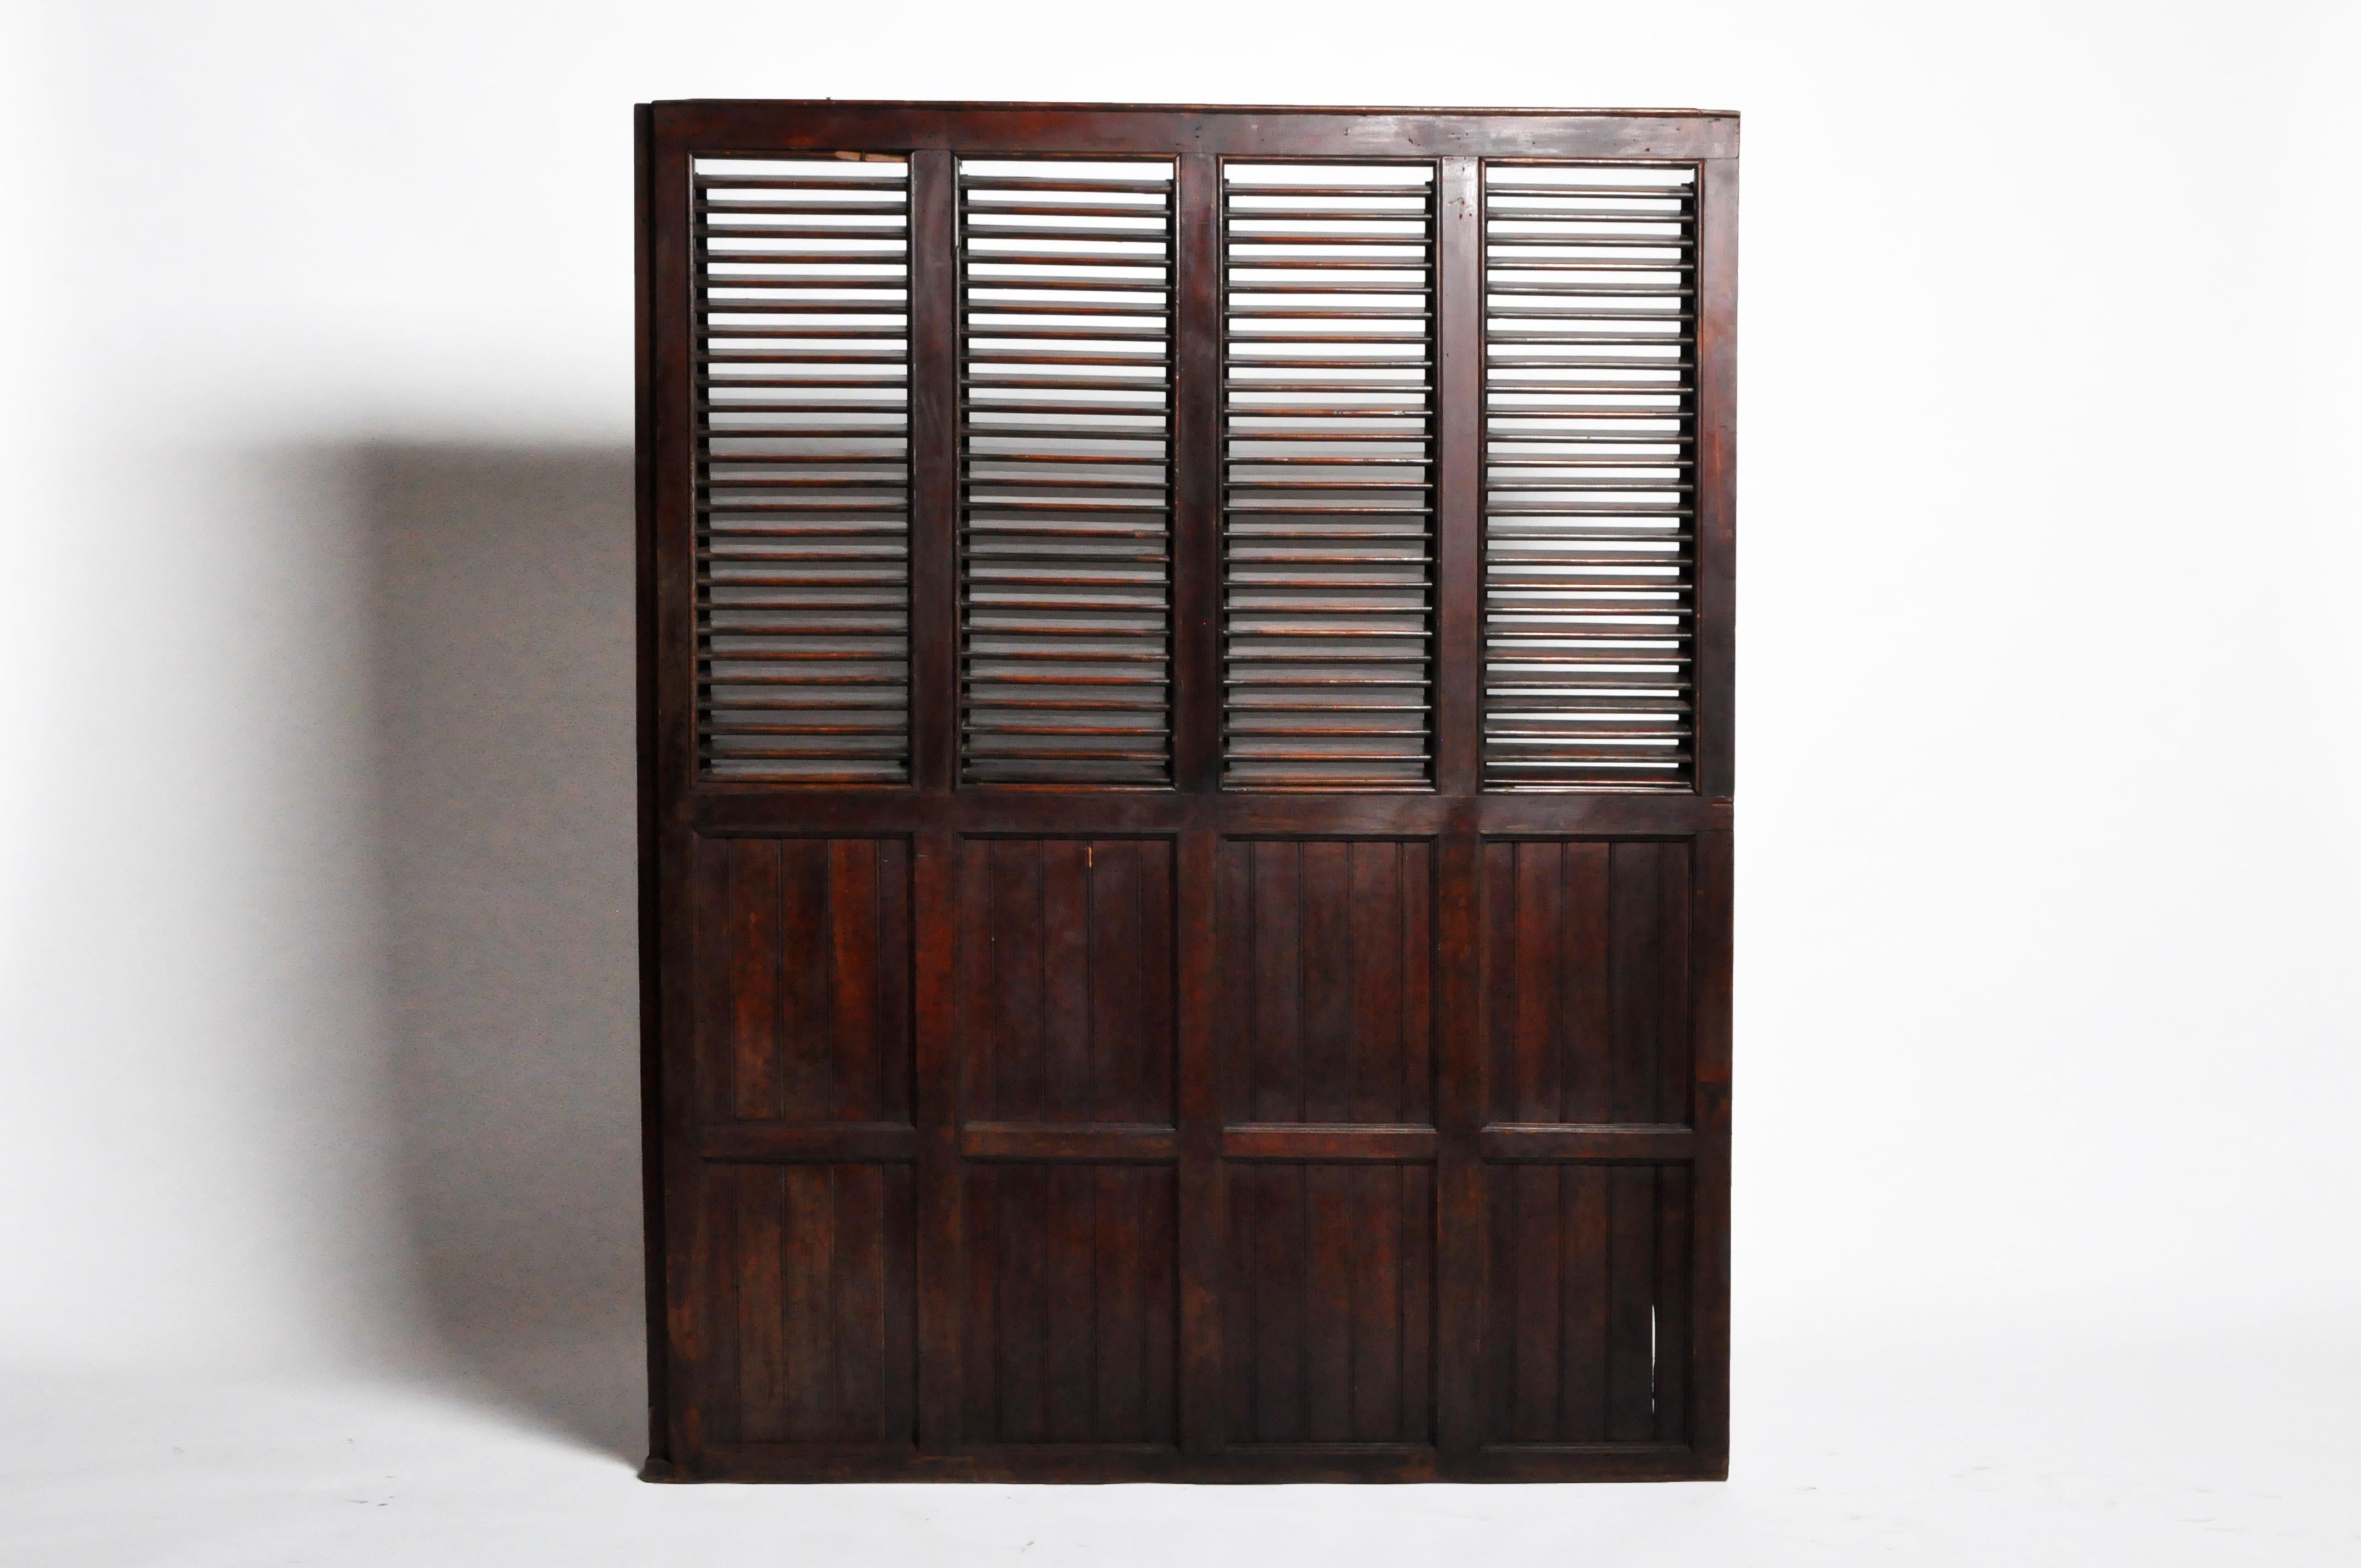 Teakwood, Rangoon, Burma, circa 1900. These louvers are fully operable and retain their original finish. The rich surface patina is natural. During the Colonial era (roughly 1850-1950), many veranda houses were built from Teakwood. As cities like